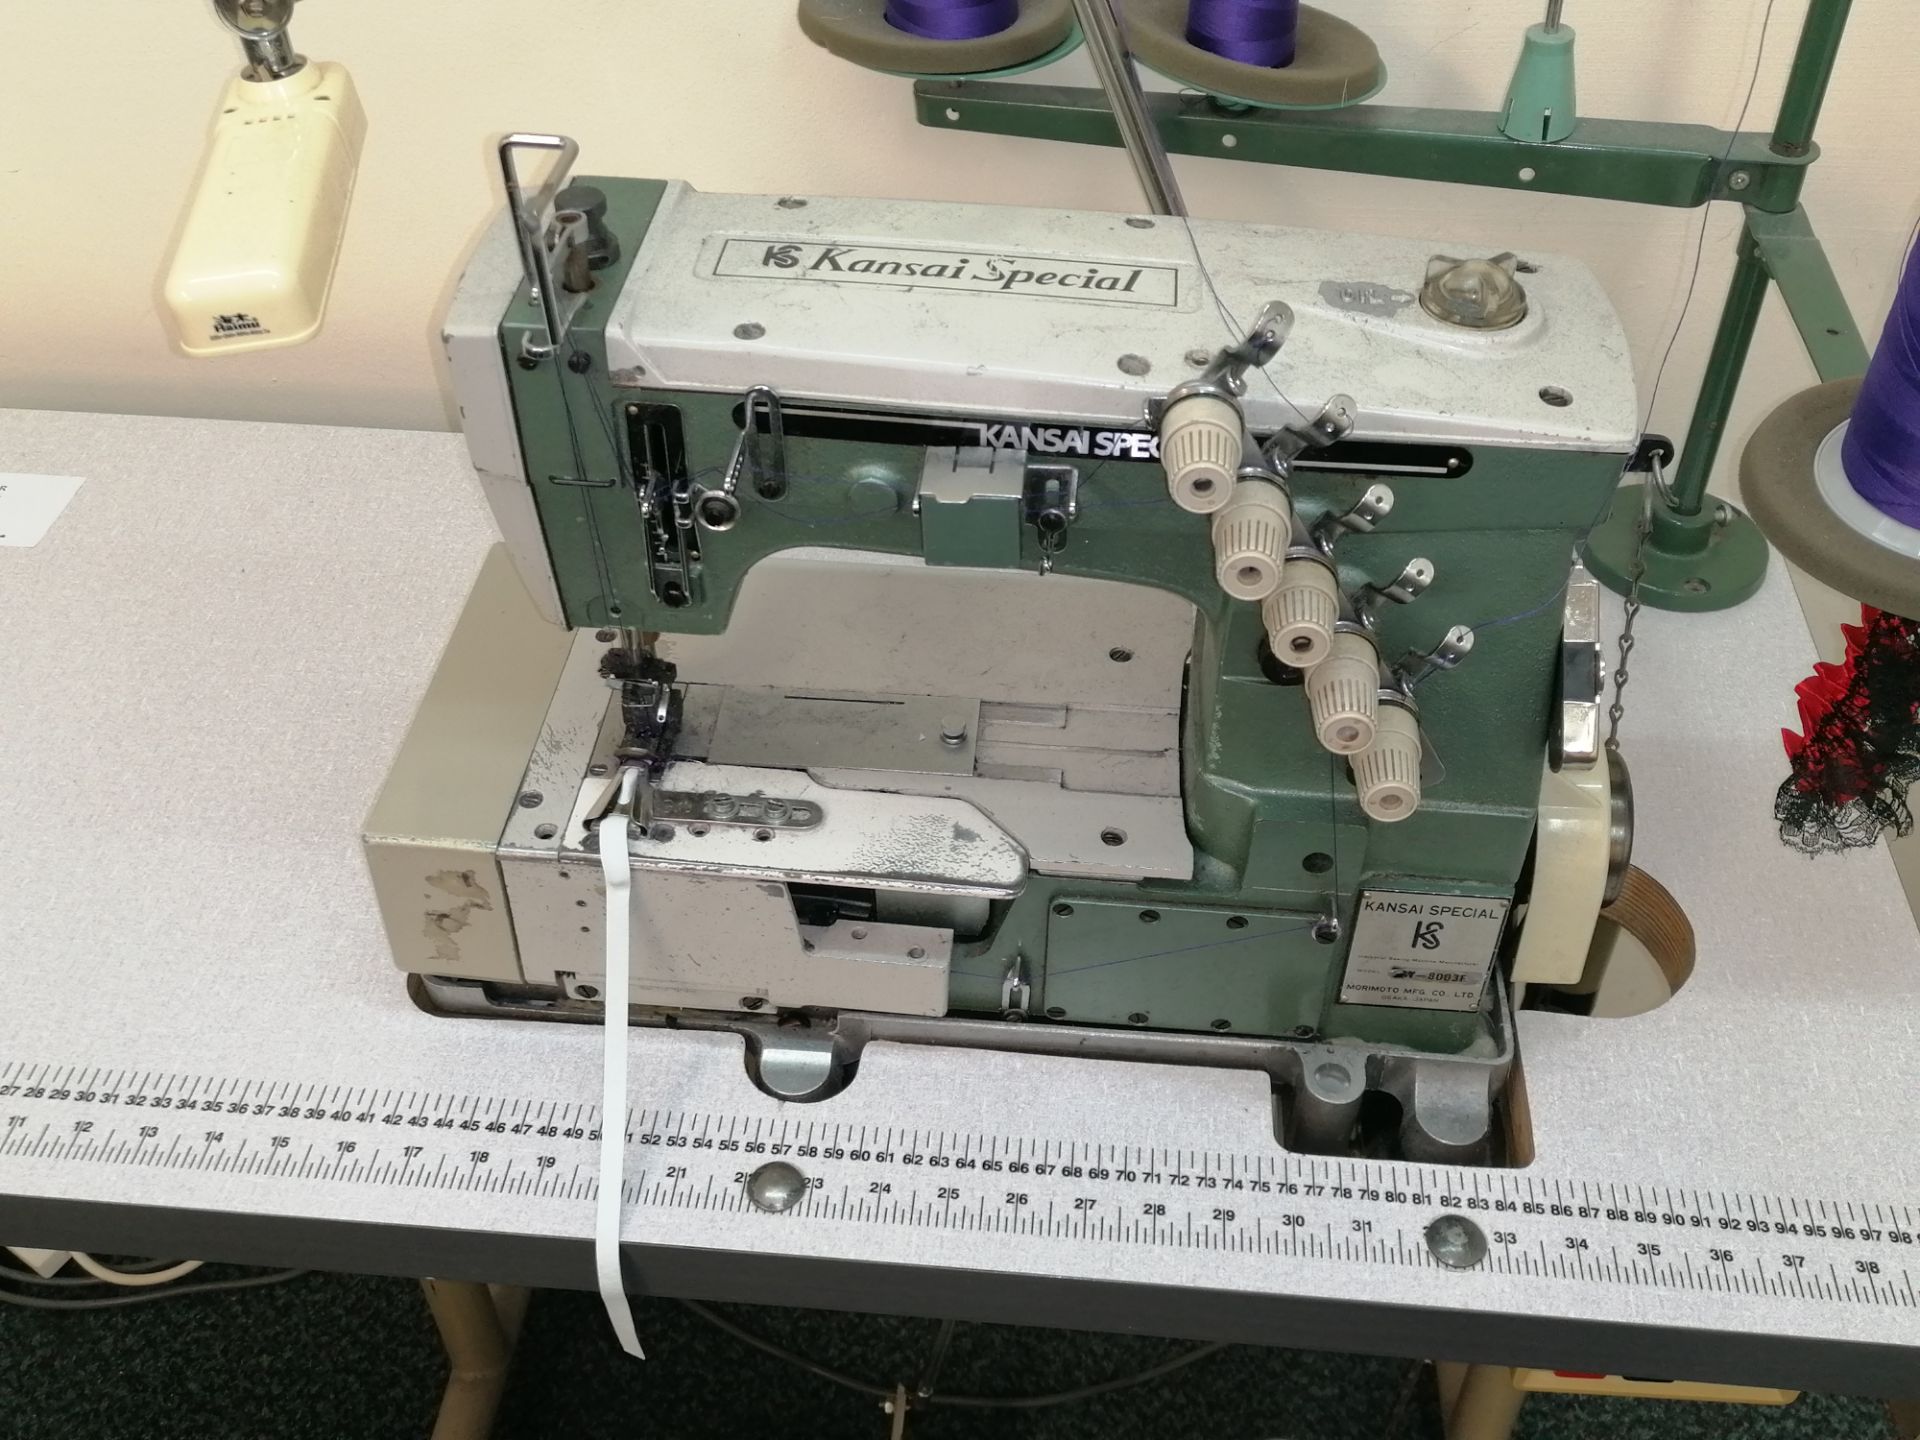 Kansai Special W-8003F Needle cover stitch industrial sewing machine Serial No KS052239 - Image 3 of 5